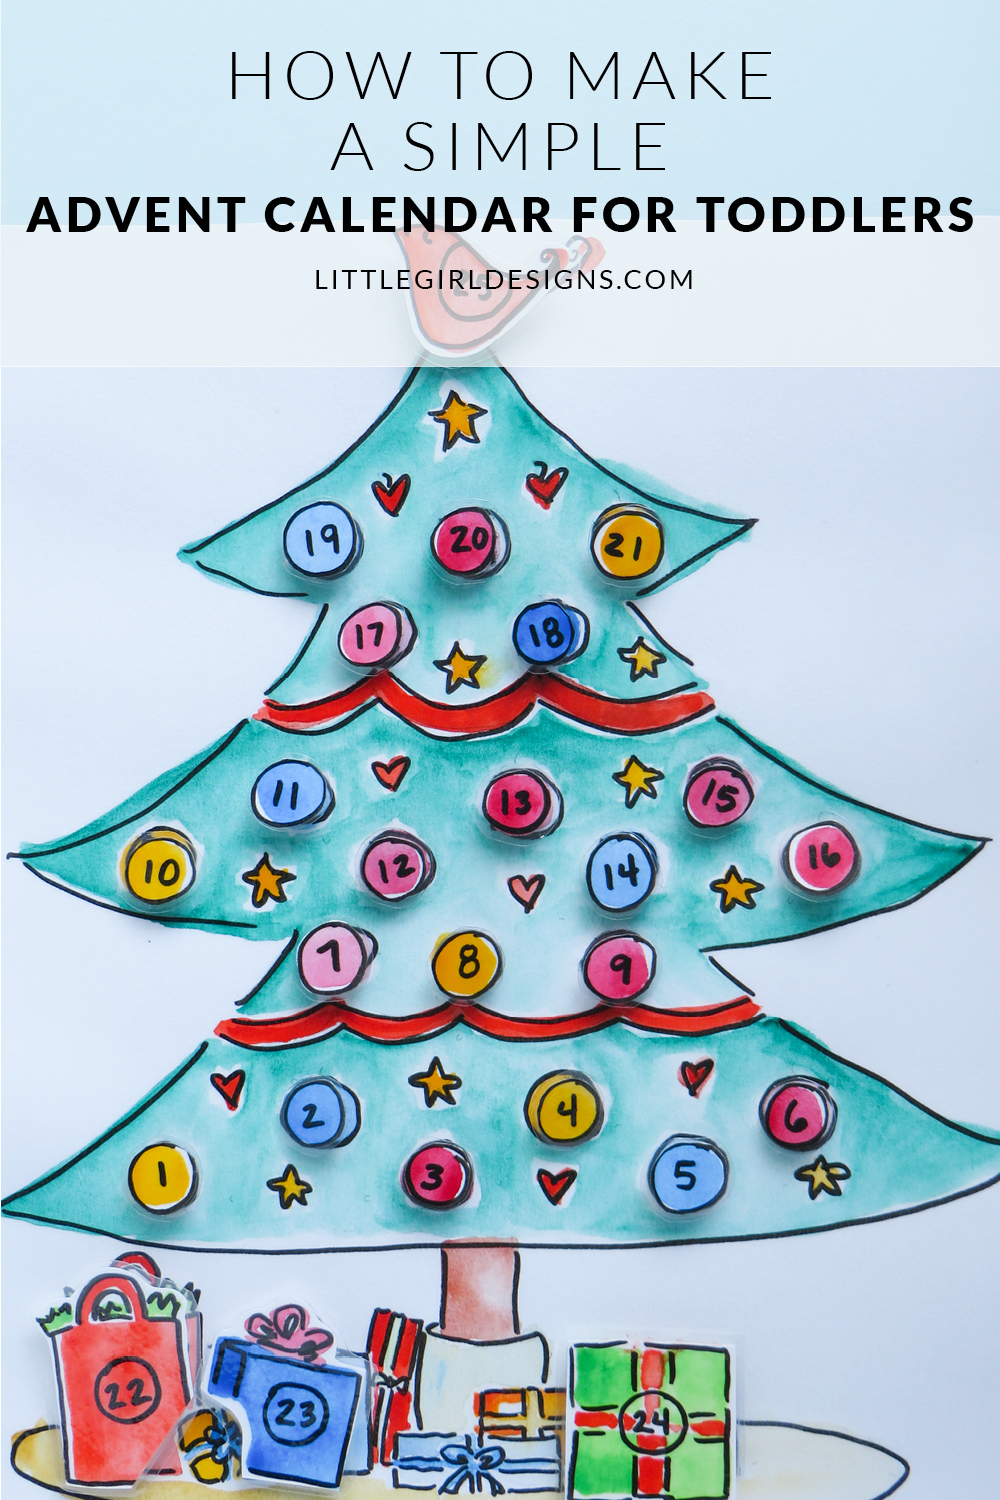 How to Make a Simple Advent Calendar for Toddlers